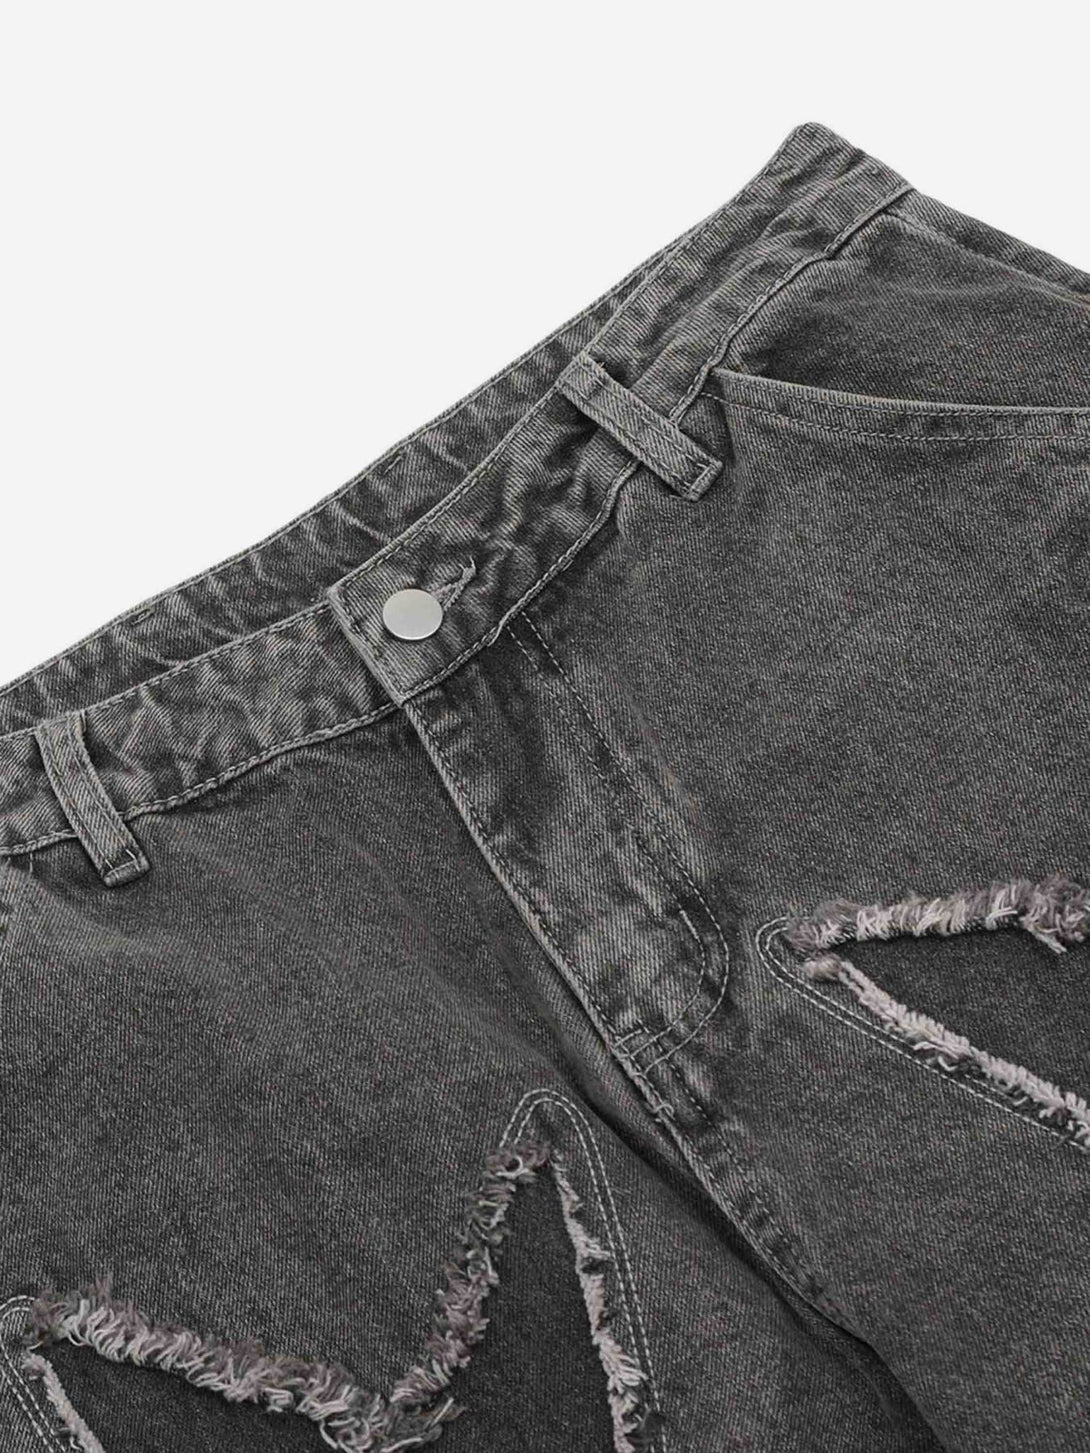 Majesda® - American Applique Star Embroidered Jeans- Outfit Ideas - Streetwear Fashion - majesda.com